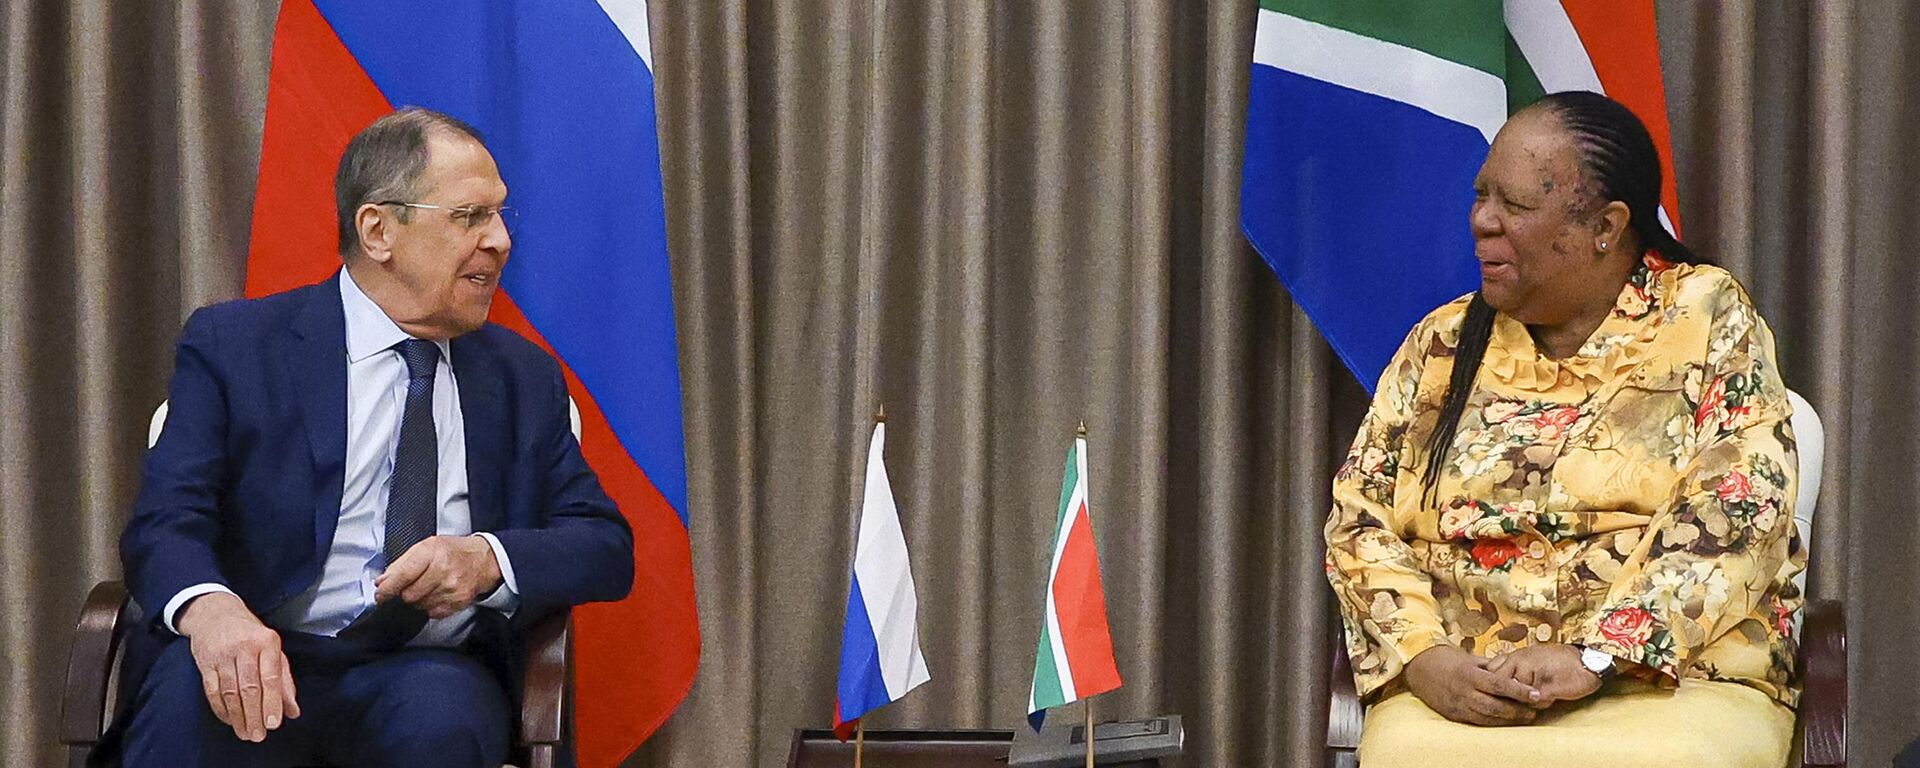 In this photo released by the Russian Foreign Ministry Press Service, Russia's Foreign Minister Sergey Lavrov, left, and his South Africa's counterpart Naledi Pandor, speak, during their meeting in Pretoria, South Africa, Monday, Jan. 23, 2023 - Sputnik Africa, 1920, 12.05.2023